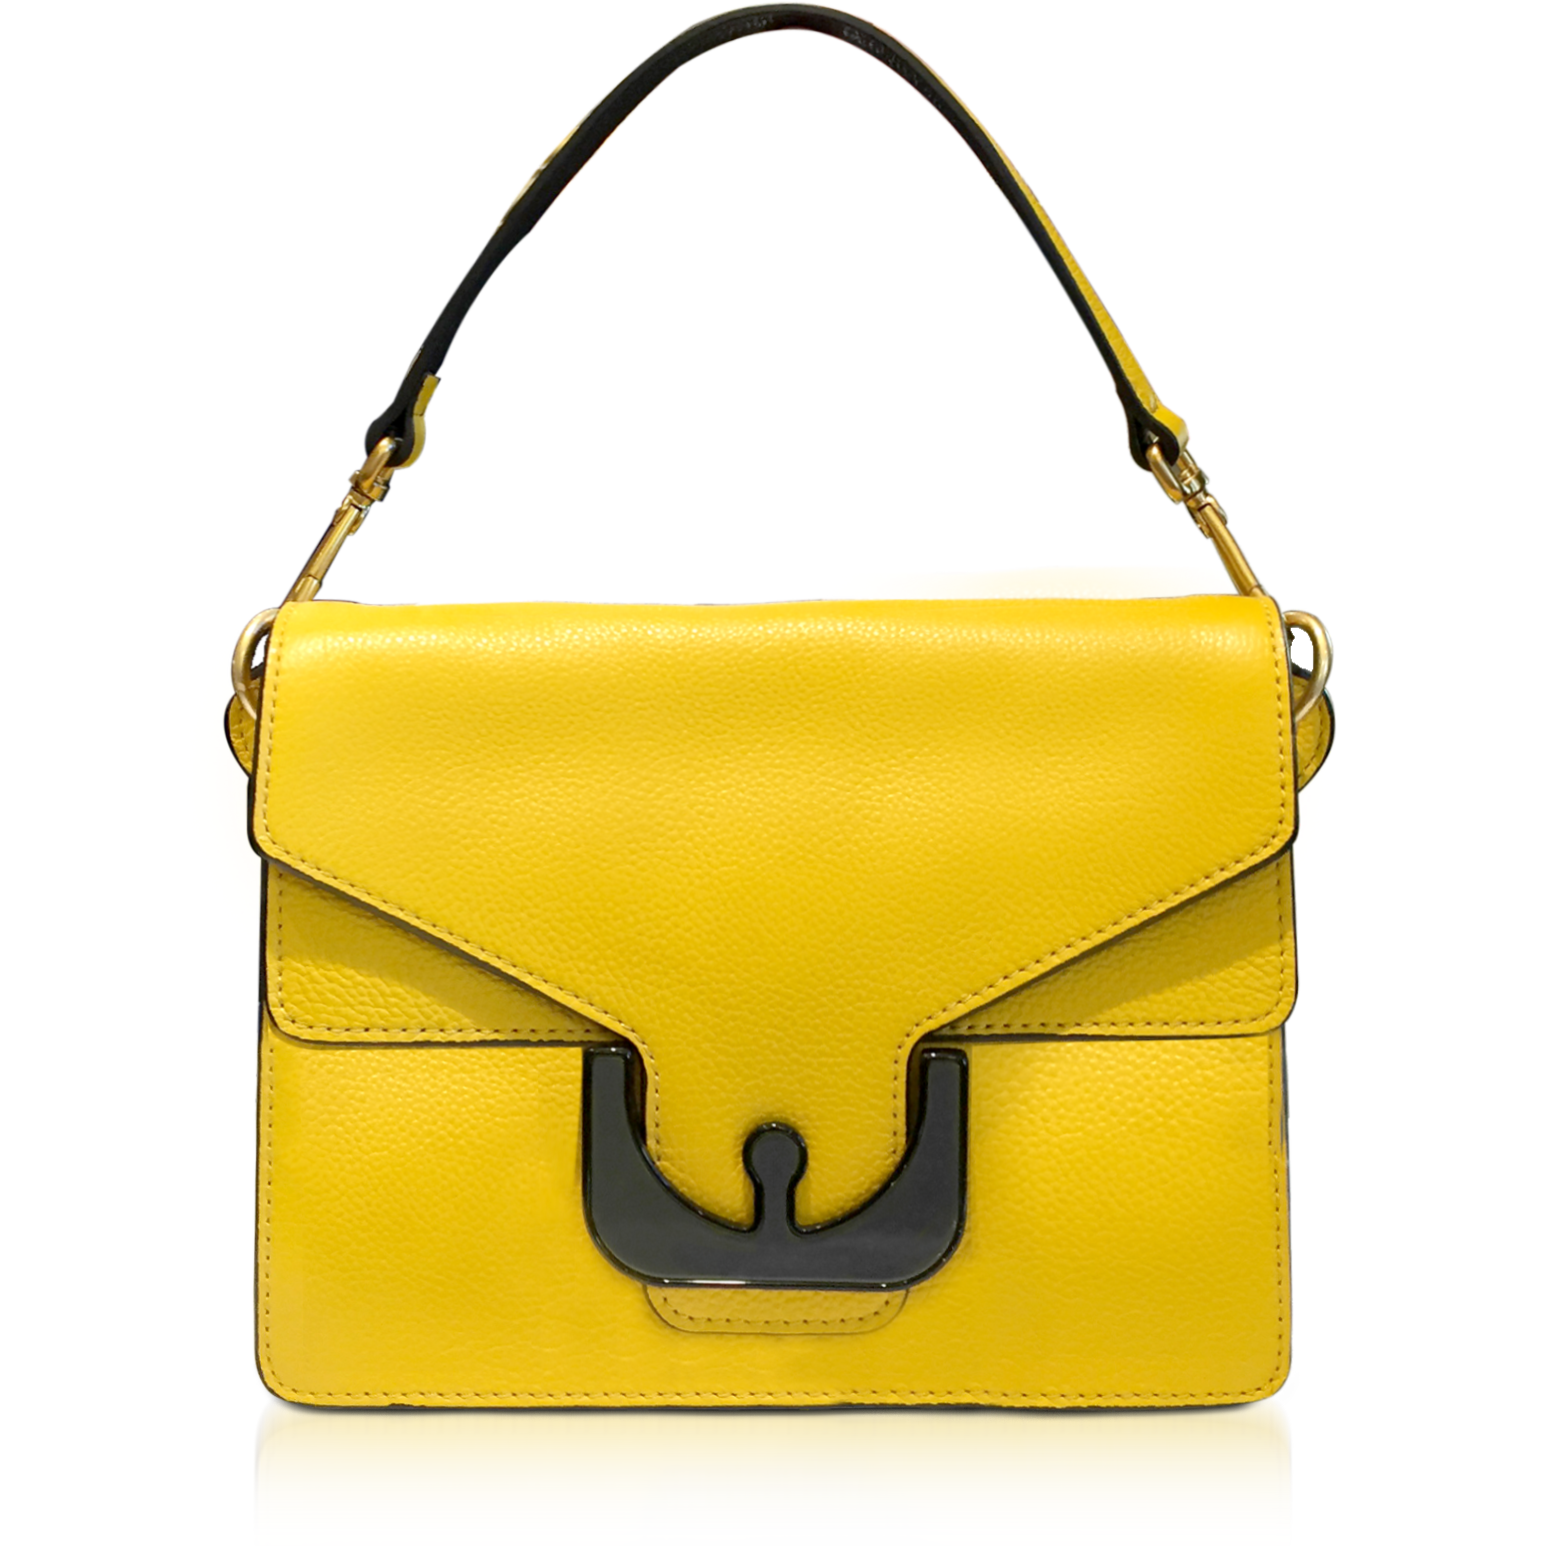 Coccinelle Ambrine Graphic Sunflower Leather Satchel Bag at FORZIERI